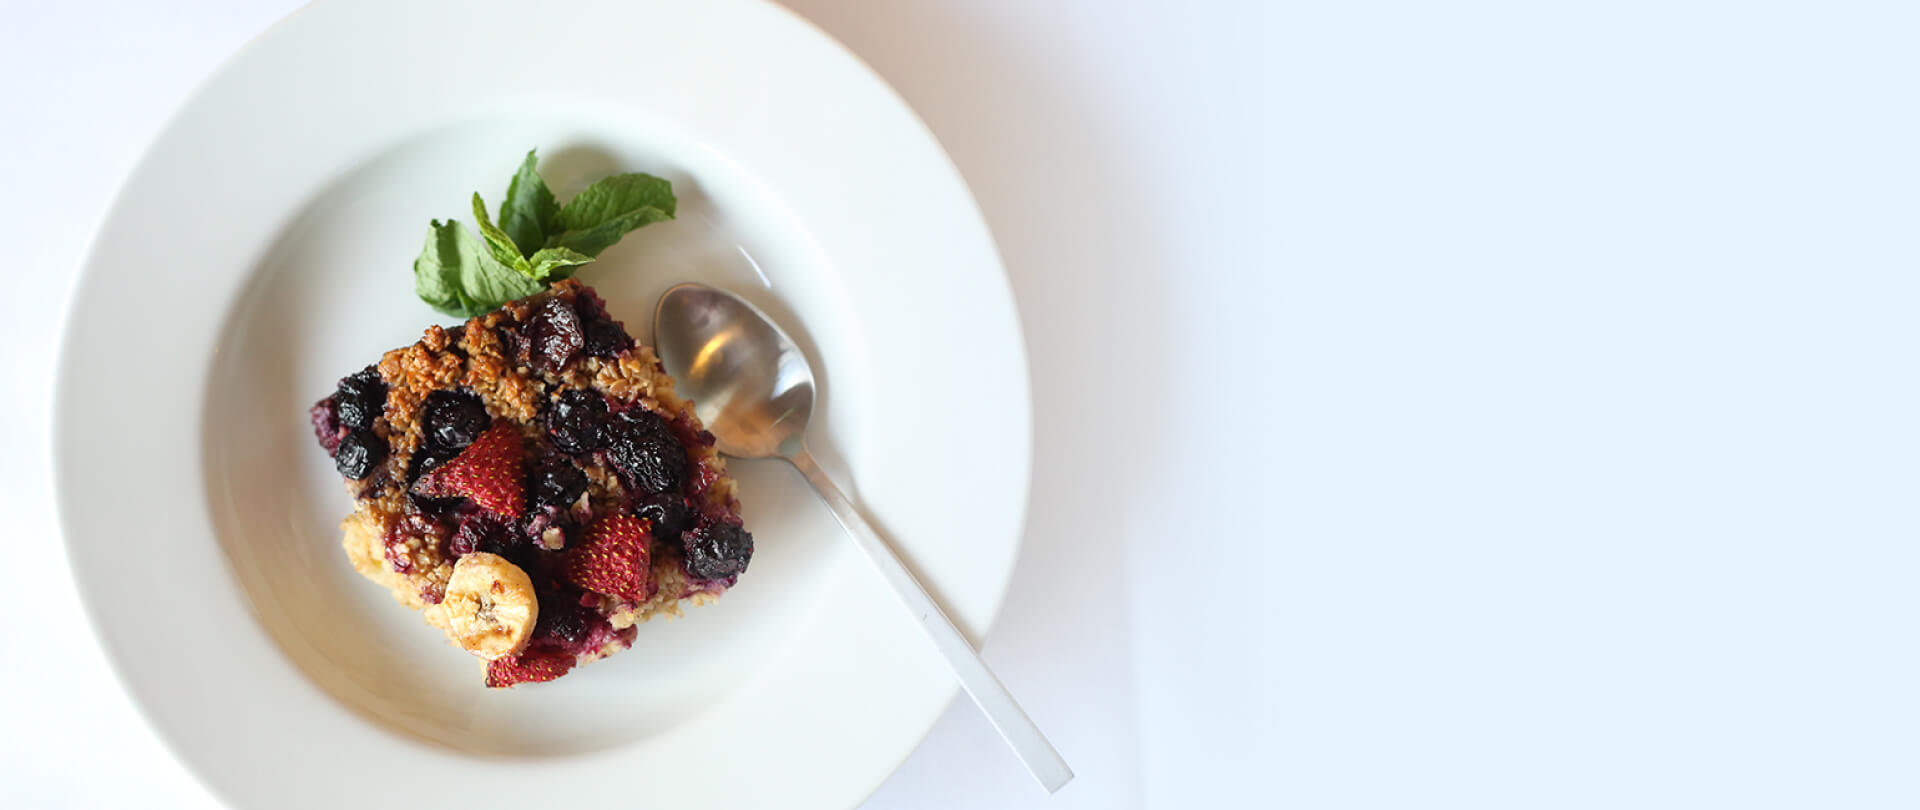 delicious scone with berry toppings on a white plate